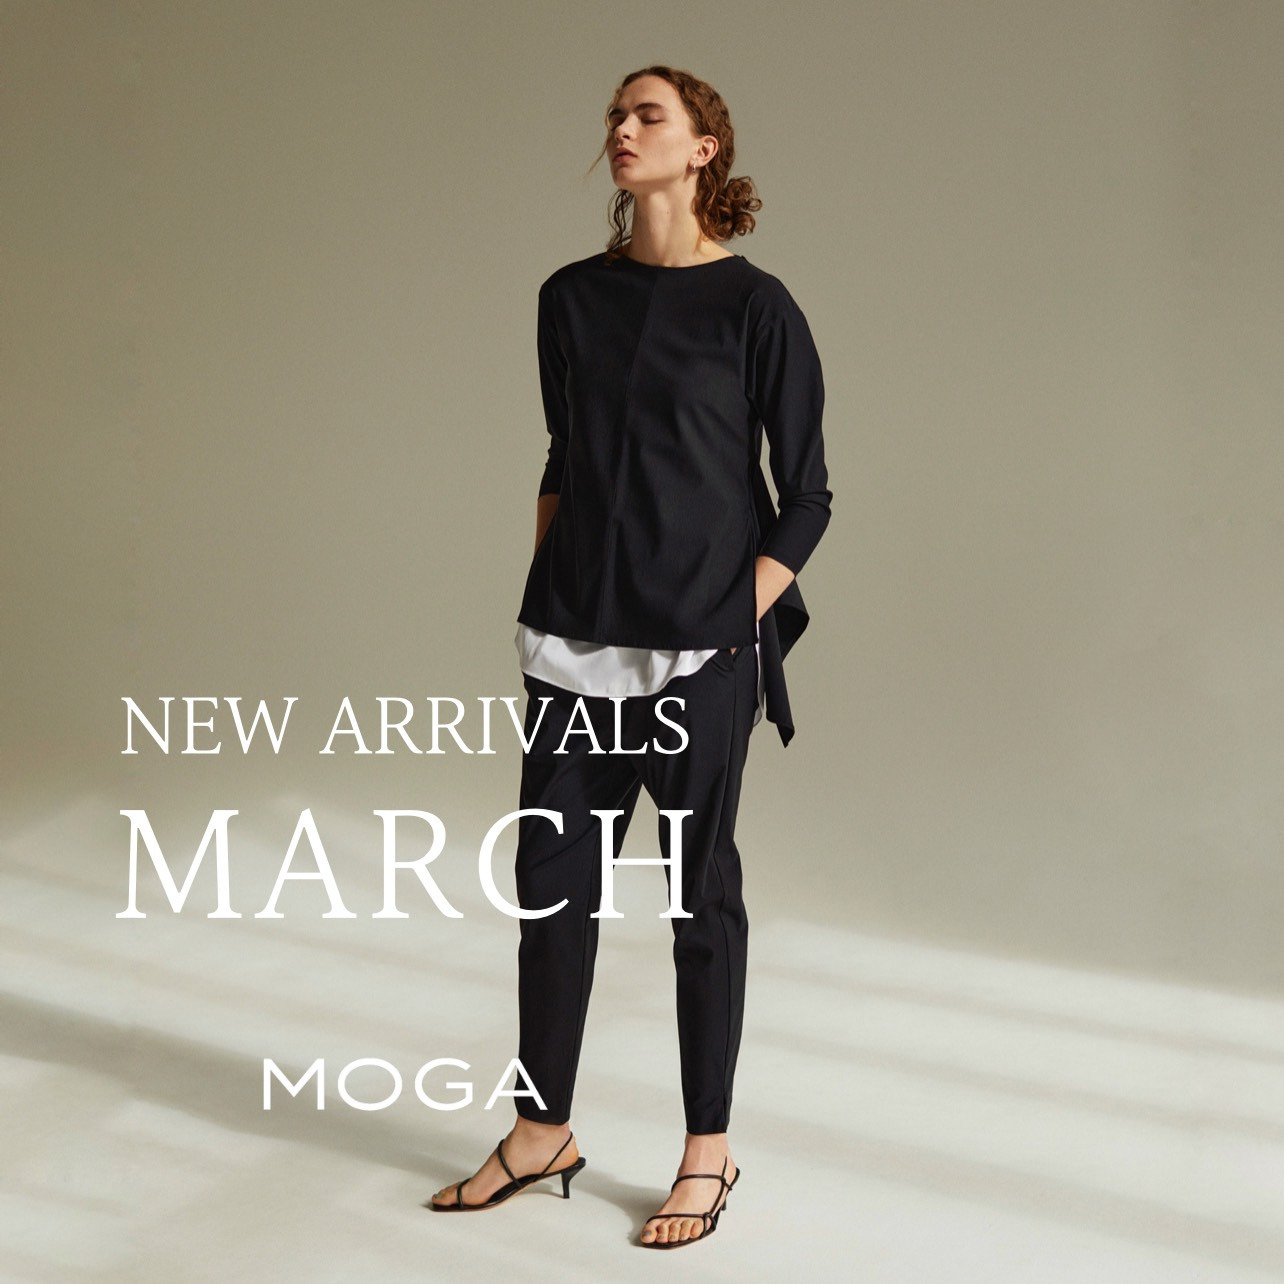 MARCH NEW ARRIVALS